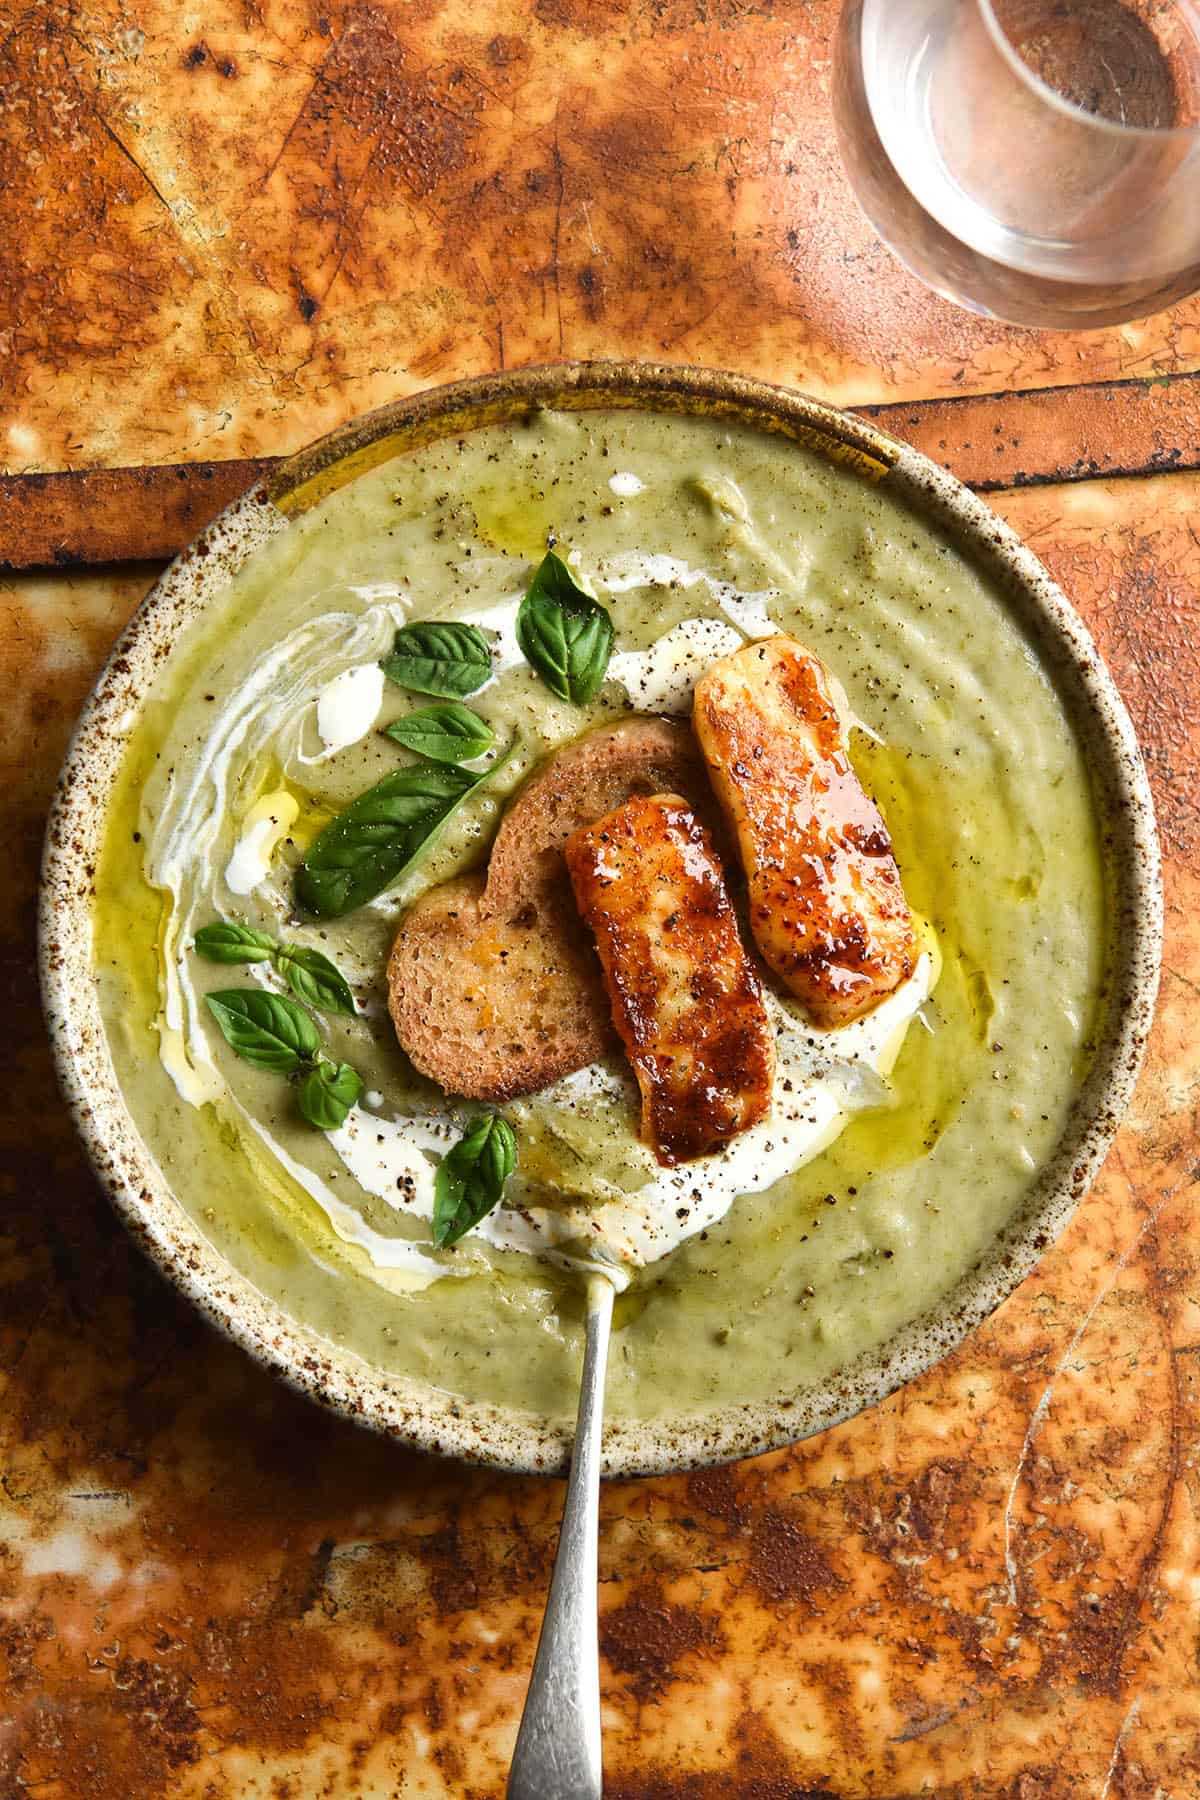 An aerial view of a speckled ceramic bowl of FODMAP friendly leek and potato soup. The soup is a light green because it uses leek greens to keep it FODMAP friendly. It is topped with a swirl of cream, truffle oil, a gluten free crouton, grilled haloumi and basil leaves. It sits atop a mottled bright rusty backdrop and a glass of water sits in the top right hand corner